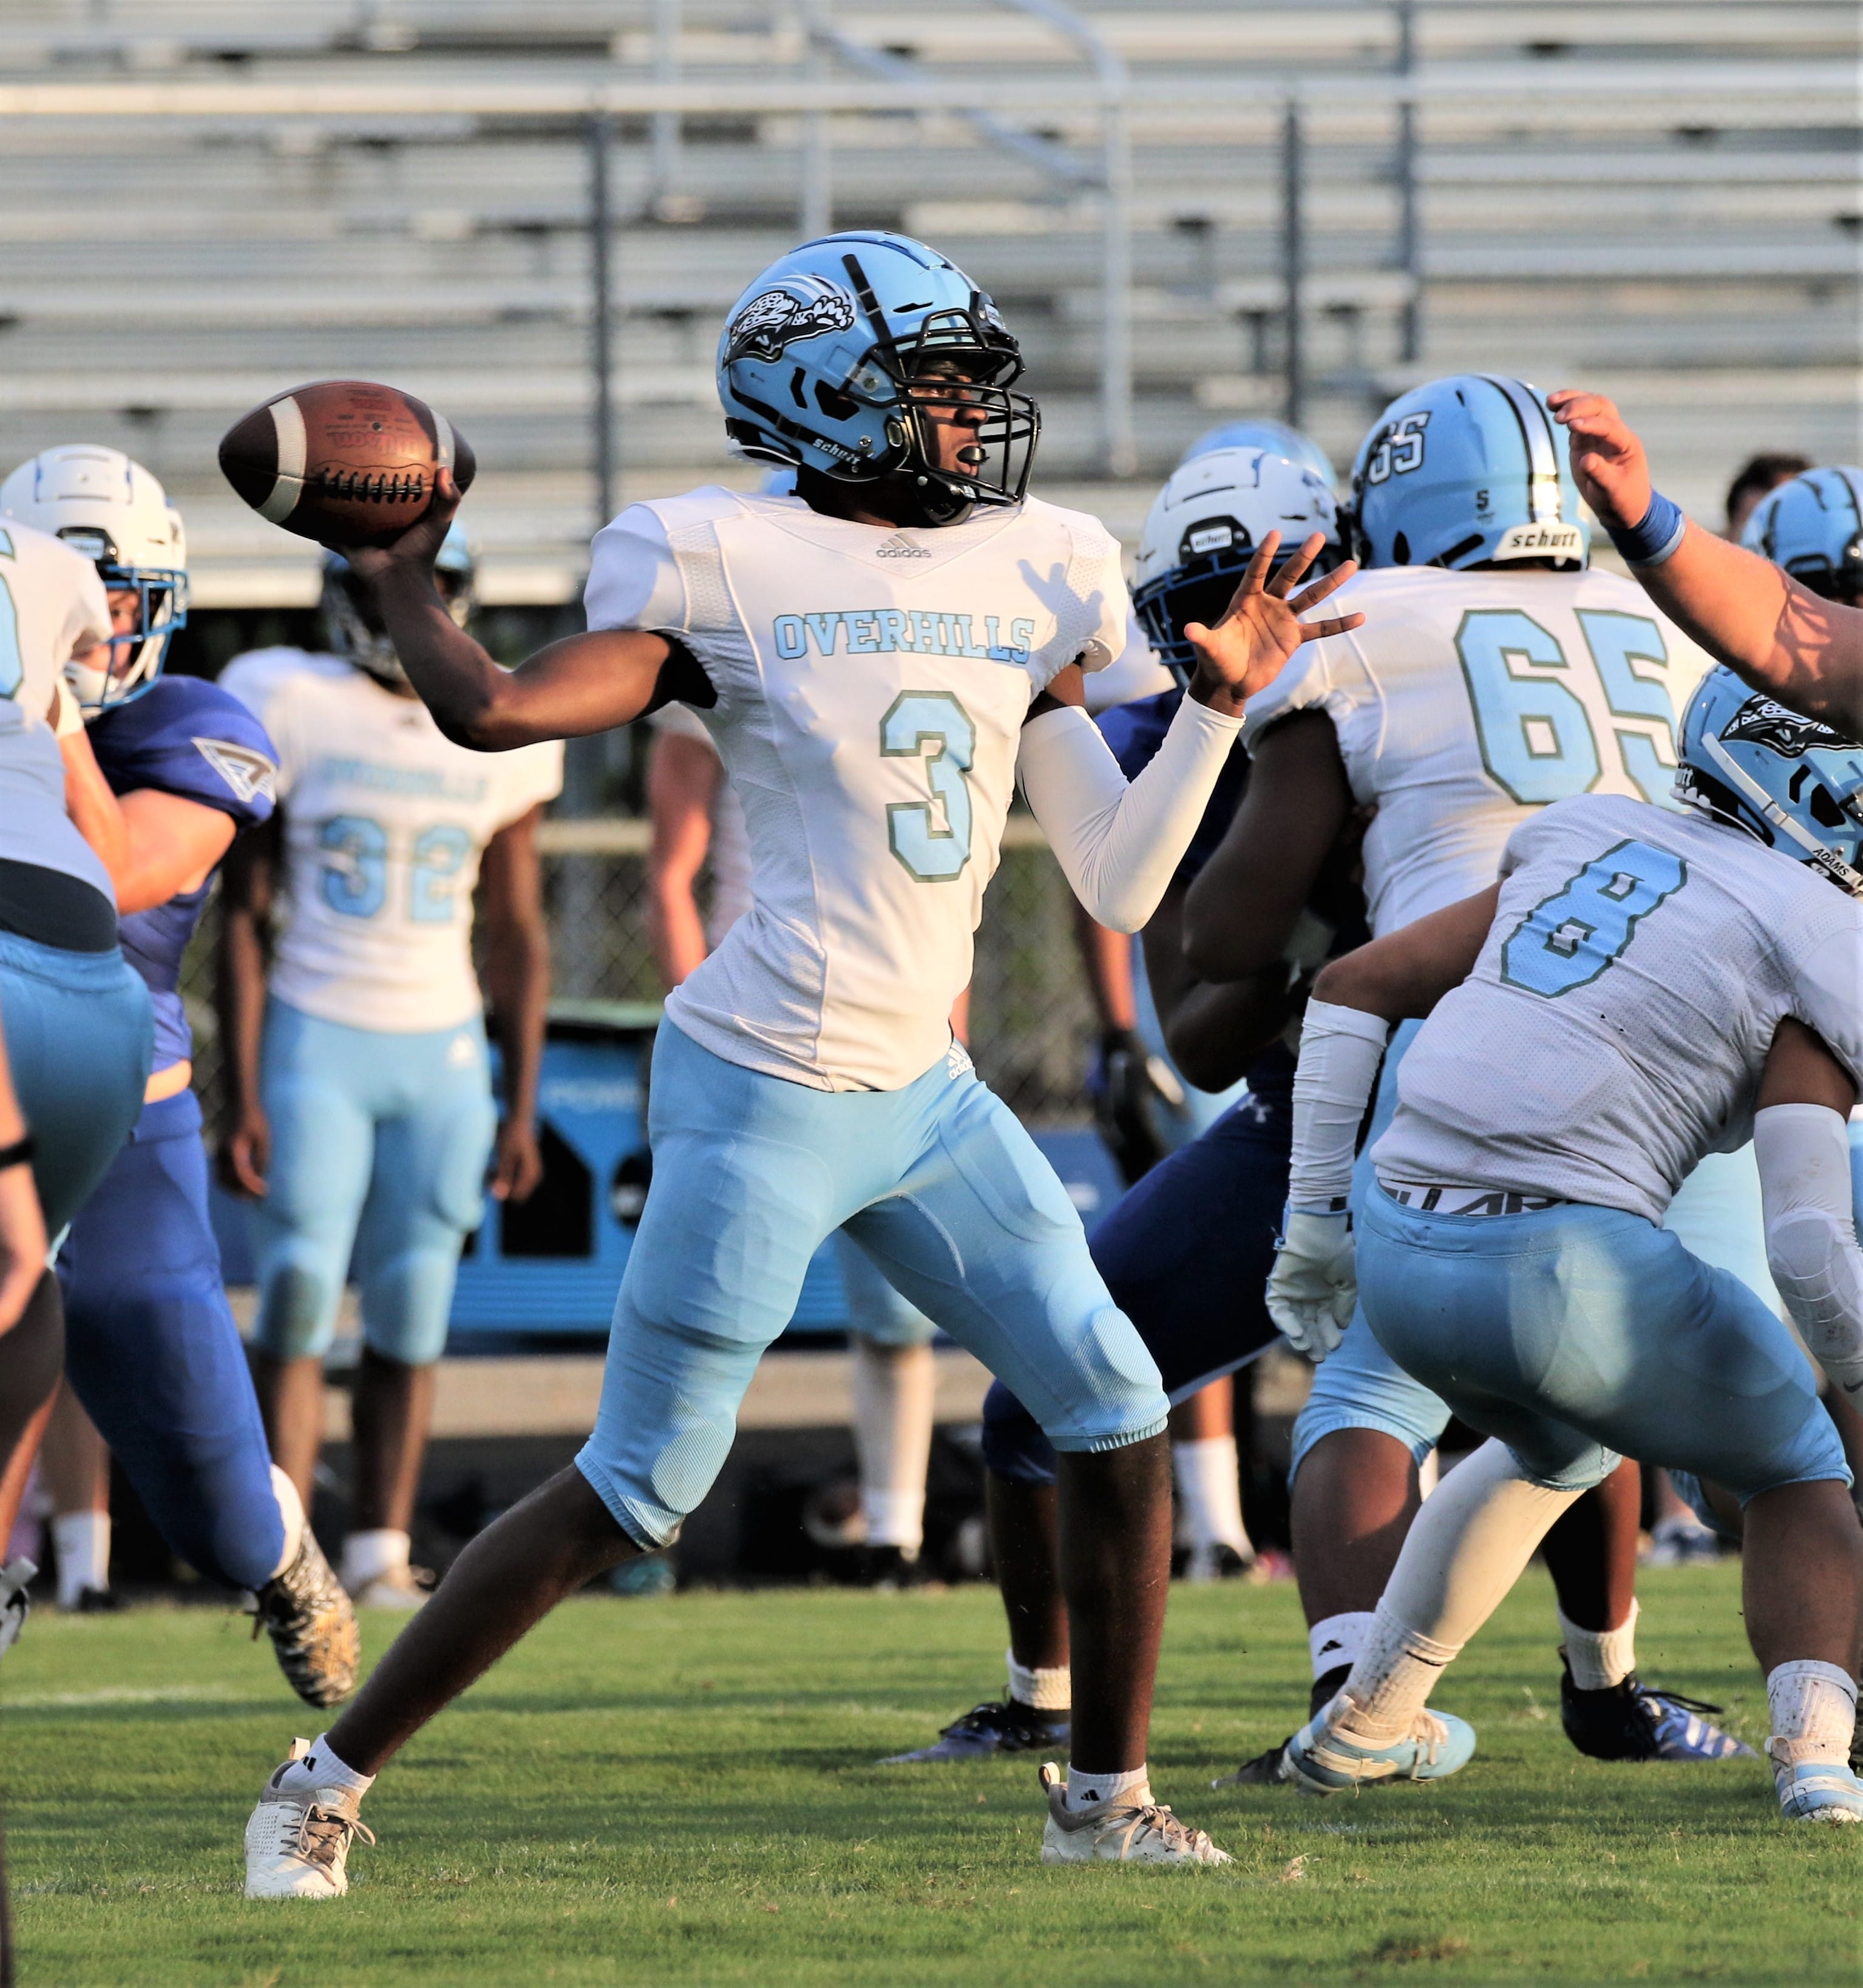 Down 18 in fourth quarter, Overhills overtakes Hawks for 52-48 win